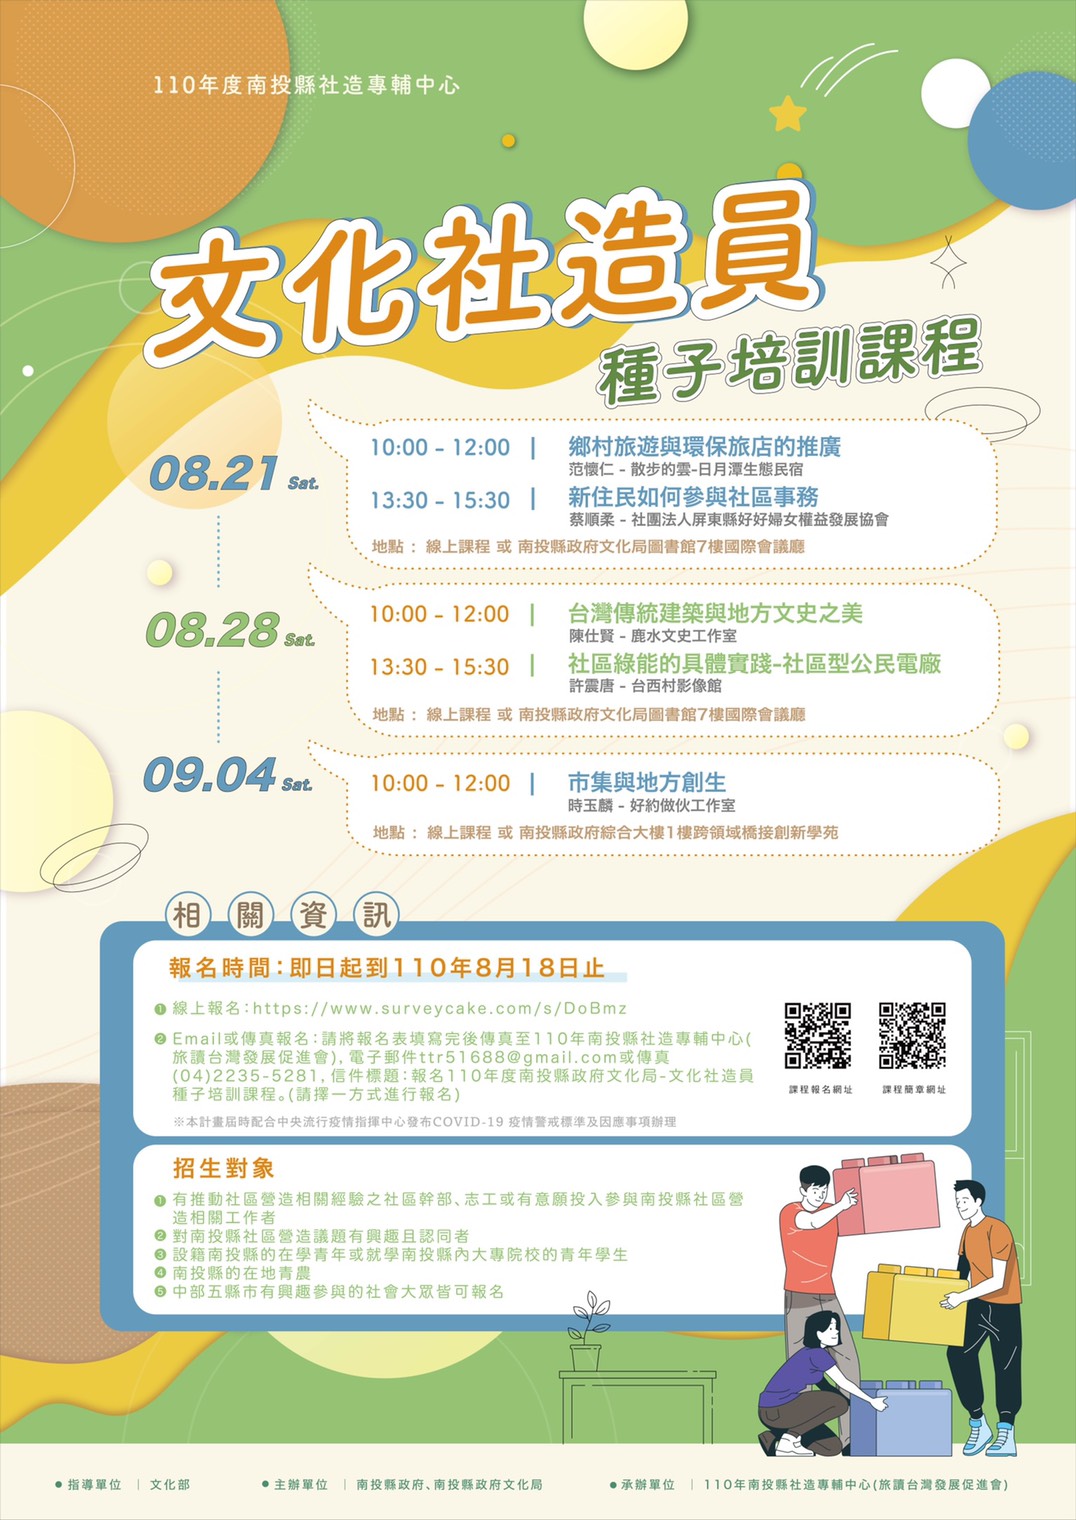 Poster of the "Seed Training Course for Cultural Community Builders" in Nantou County. (Photo/Provided by the Cultural Affairs Bureau of Nantou County)